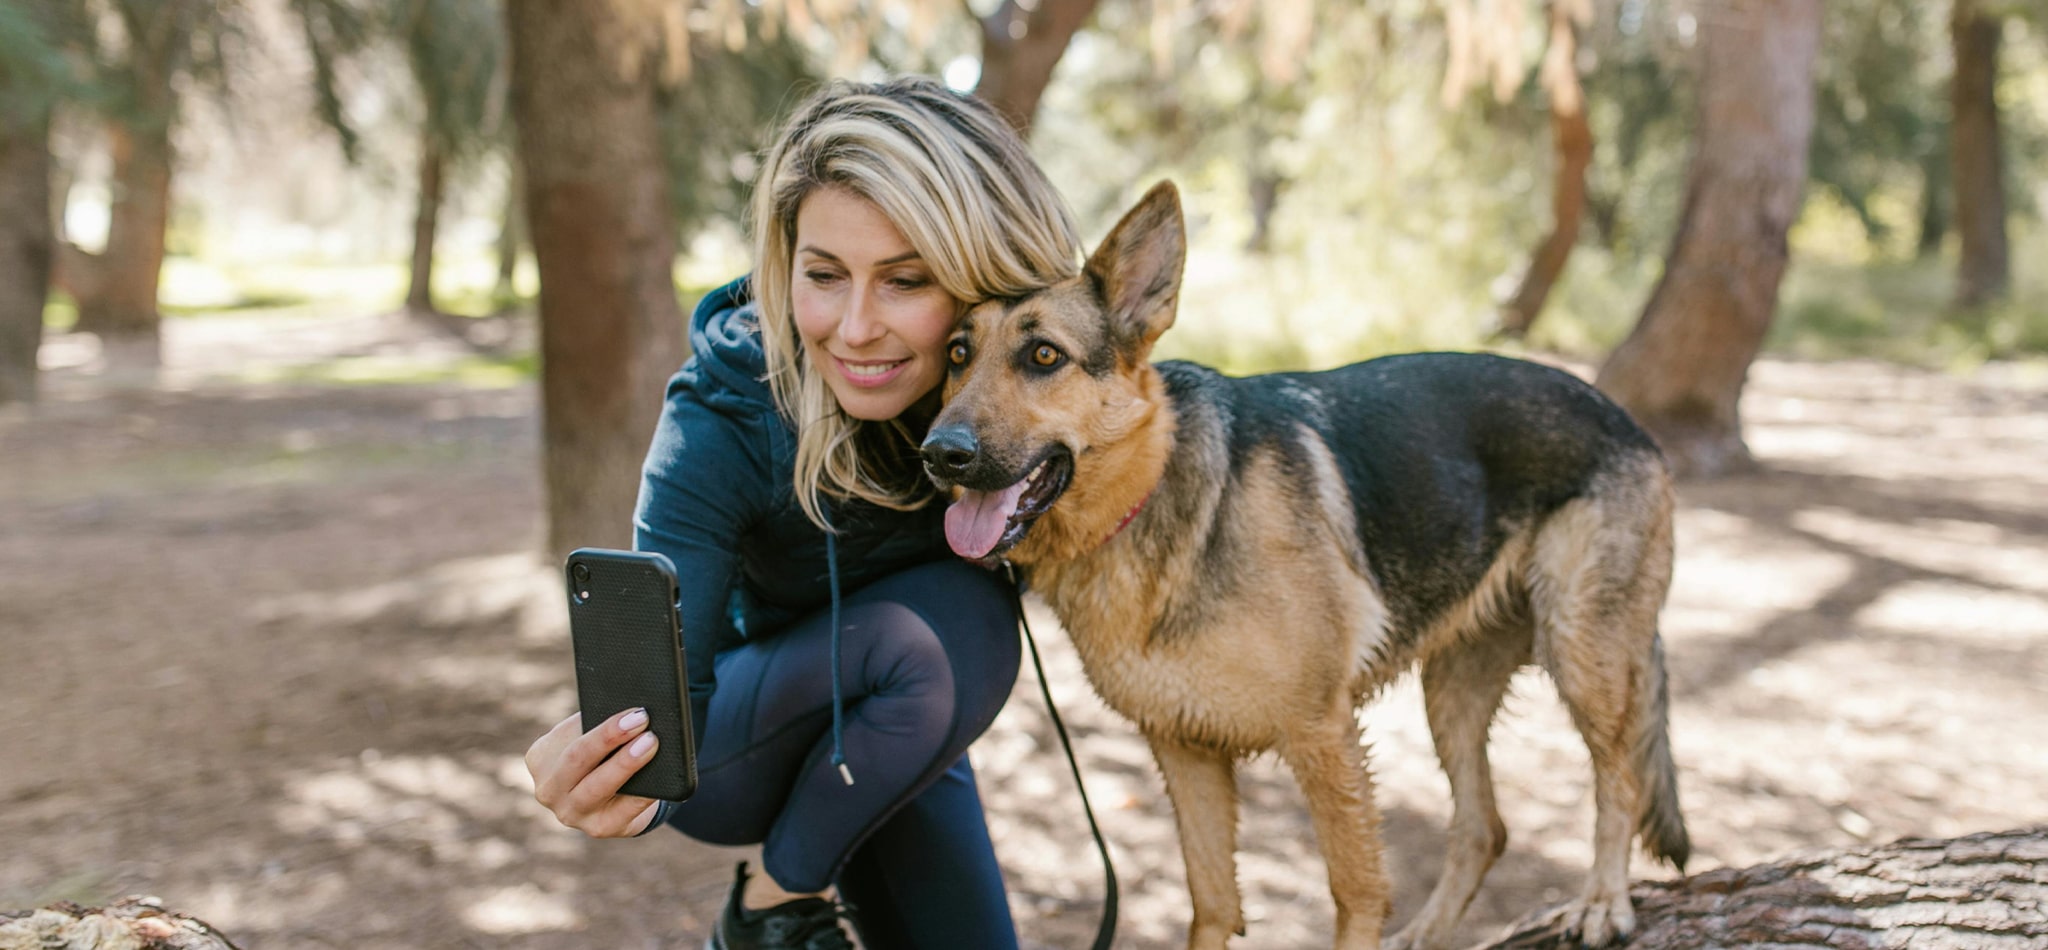 Woman taking a selfie with her dog outdoors in a forest